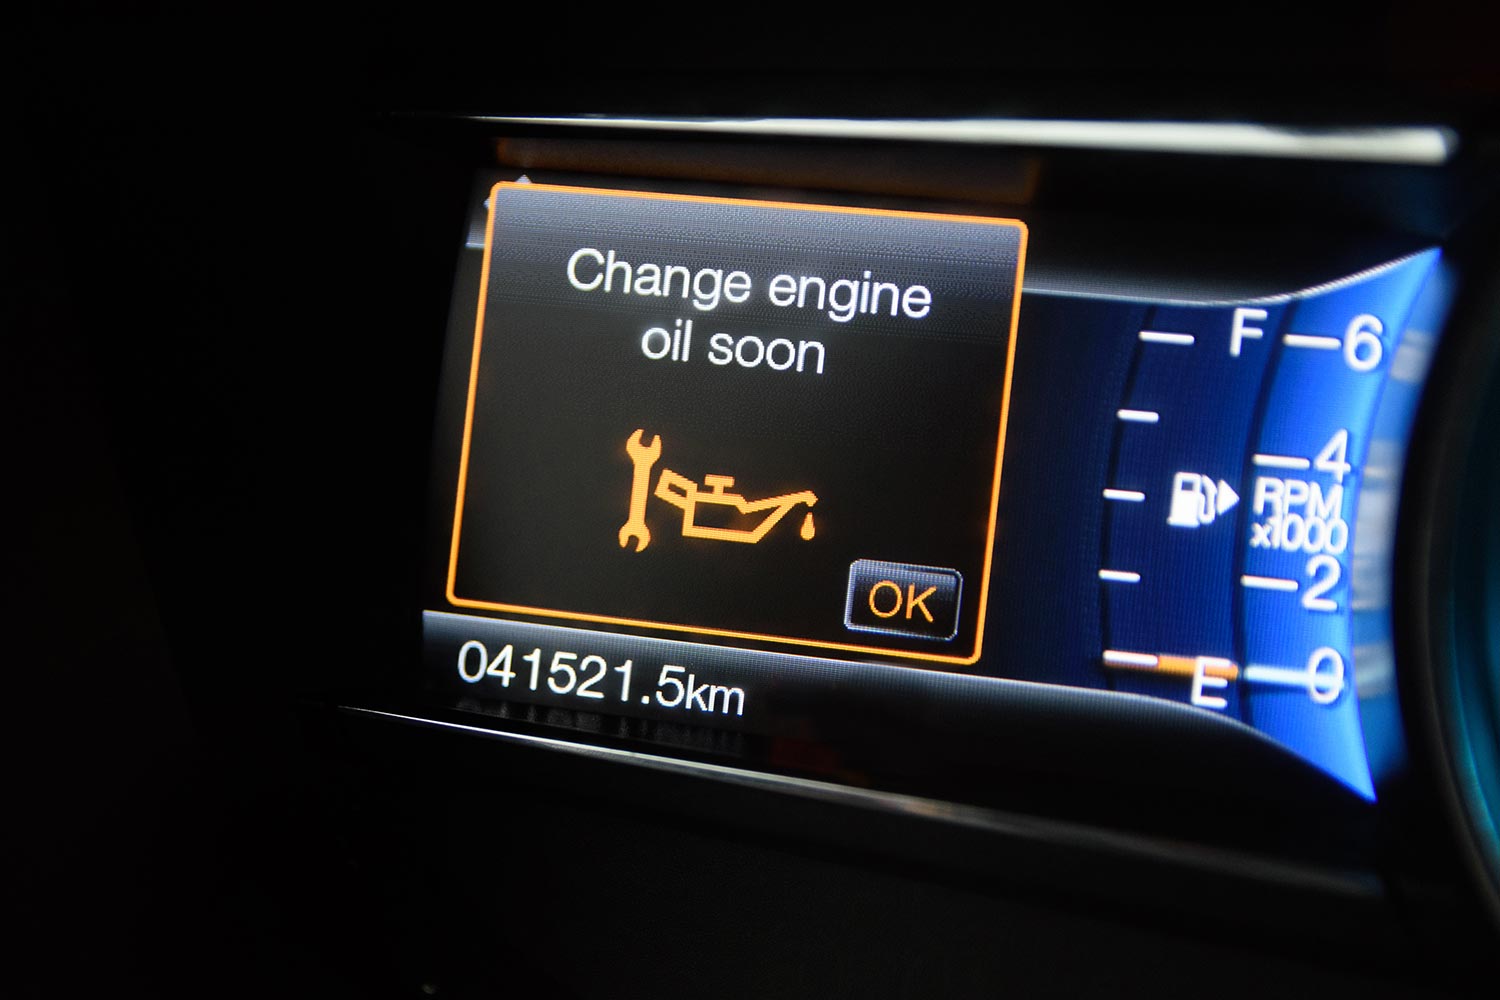 The modern car dashboard computer with color infographics warns the driver about changing engine oil soon